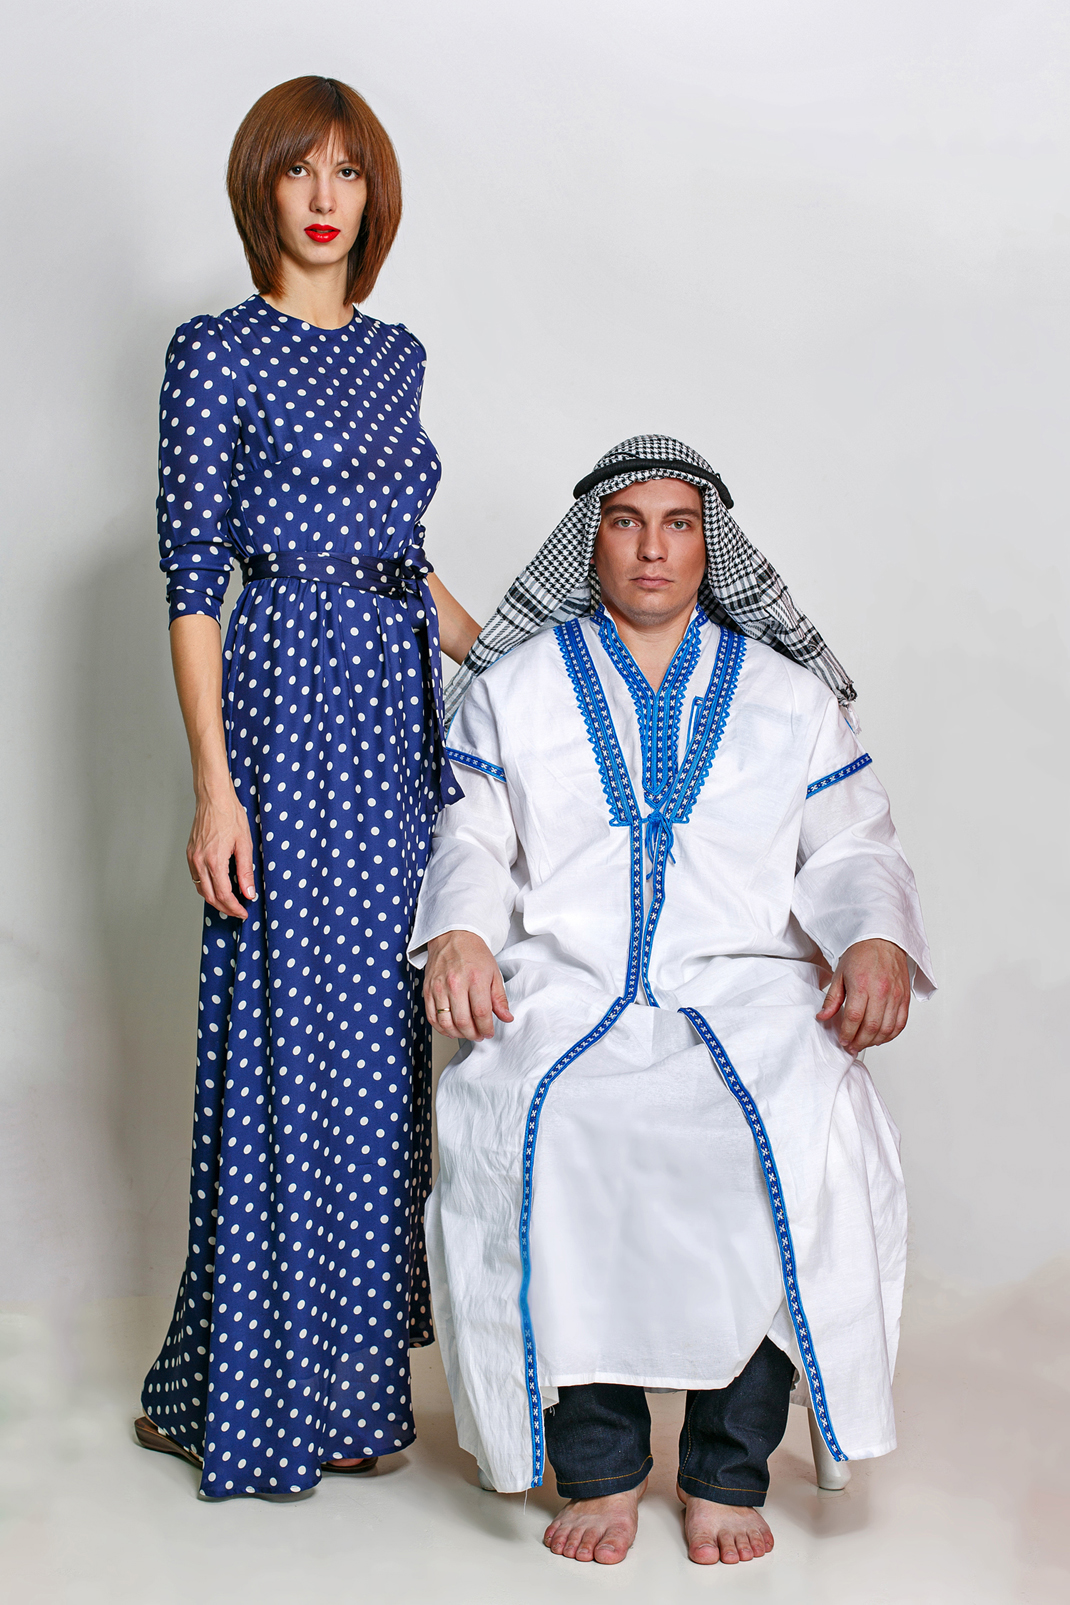 Arab and his wife